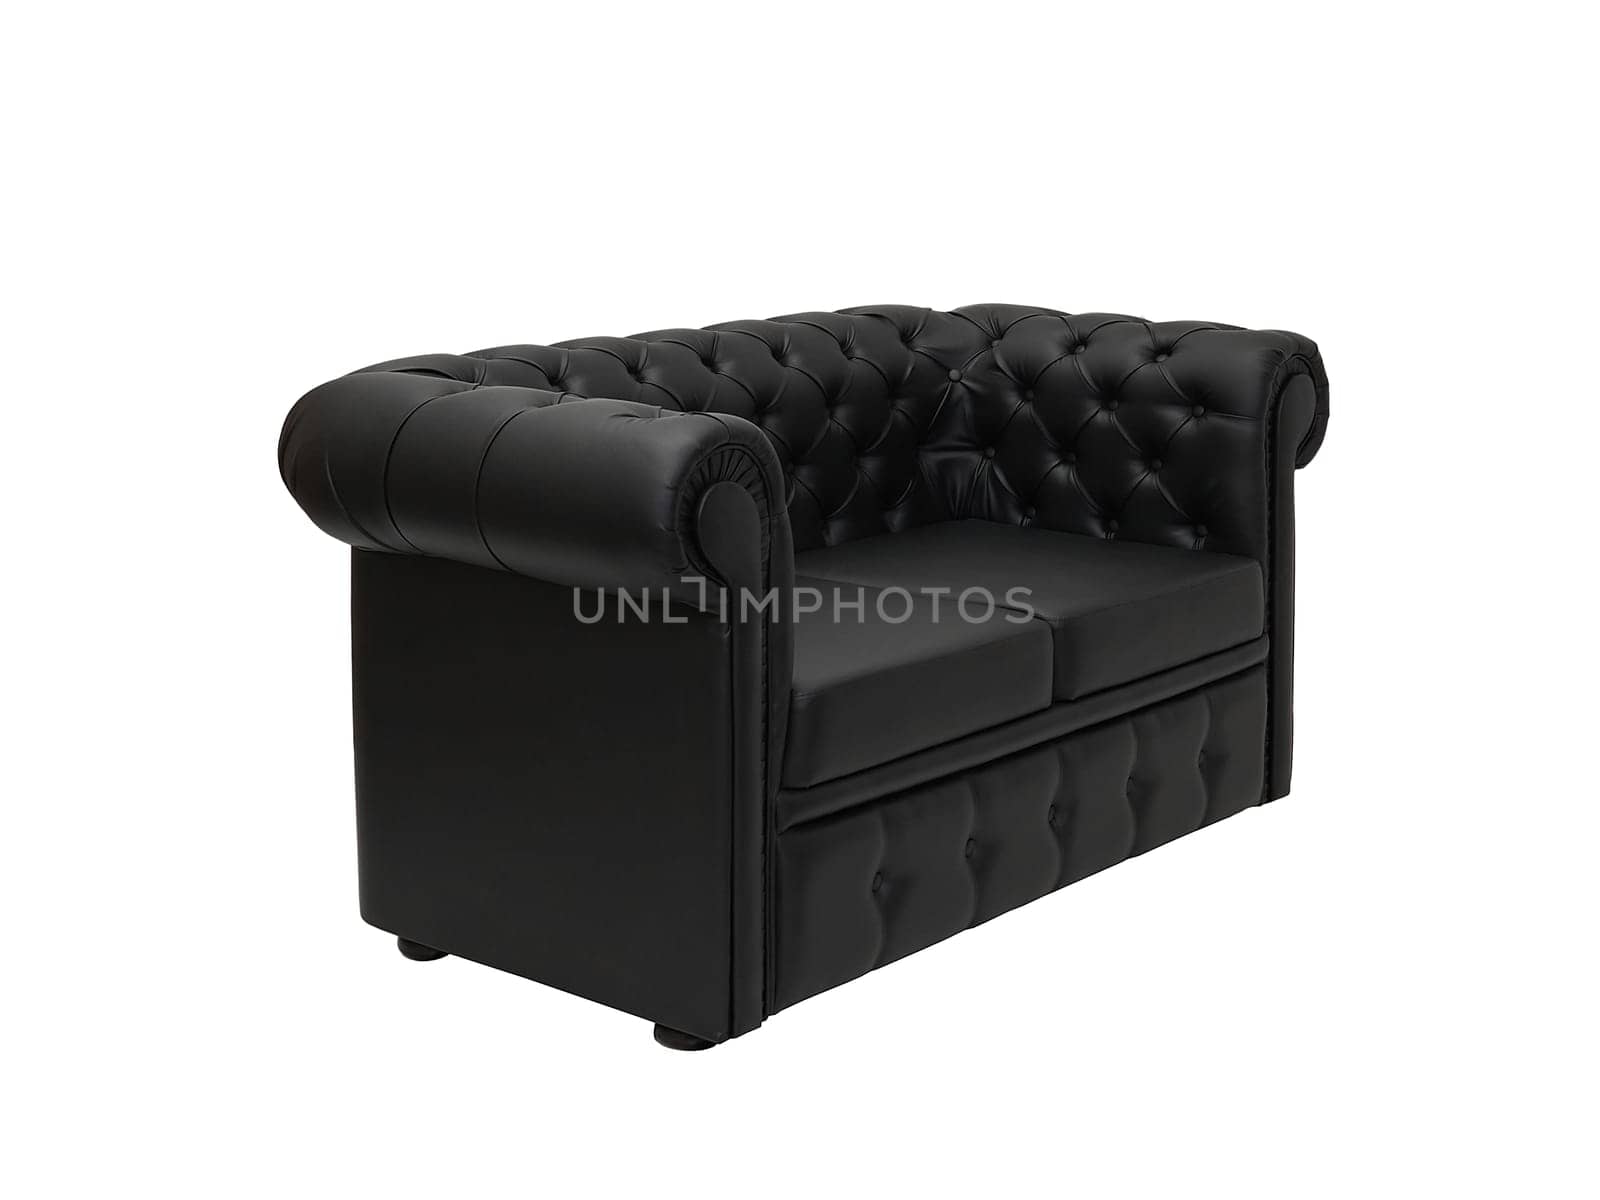 single black leather office sofa in retro style isolated on white background, side view. modern couch, furniture, interior, home design